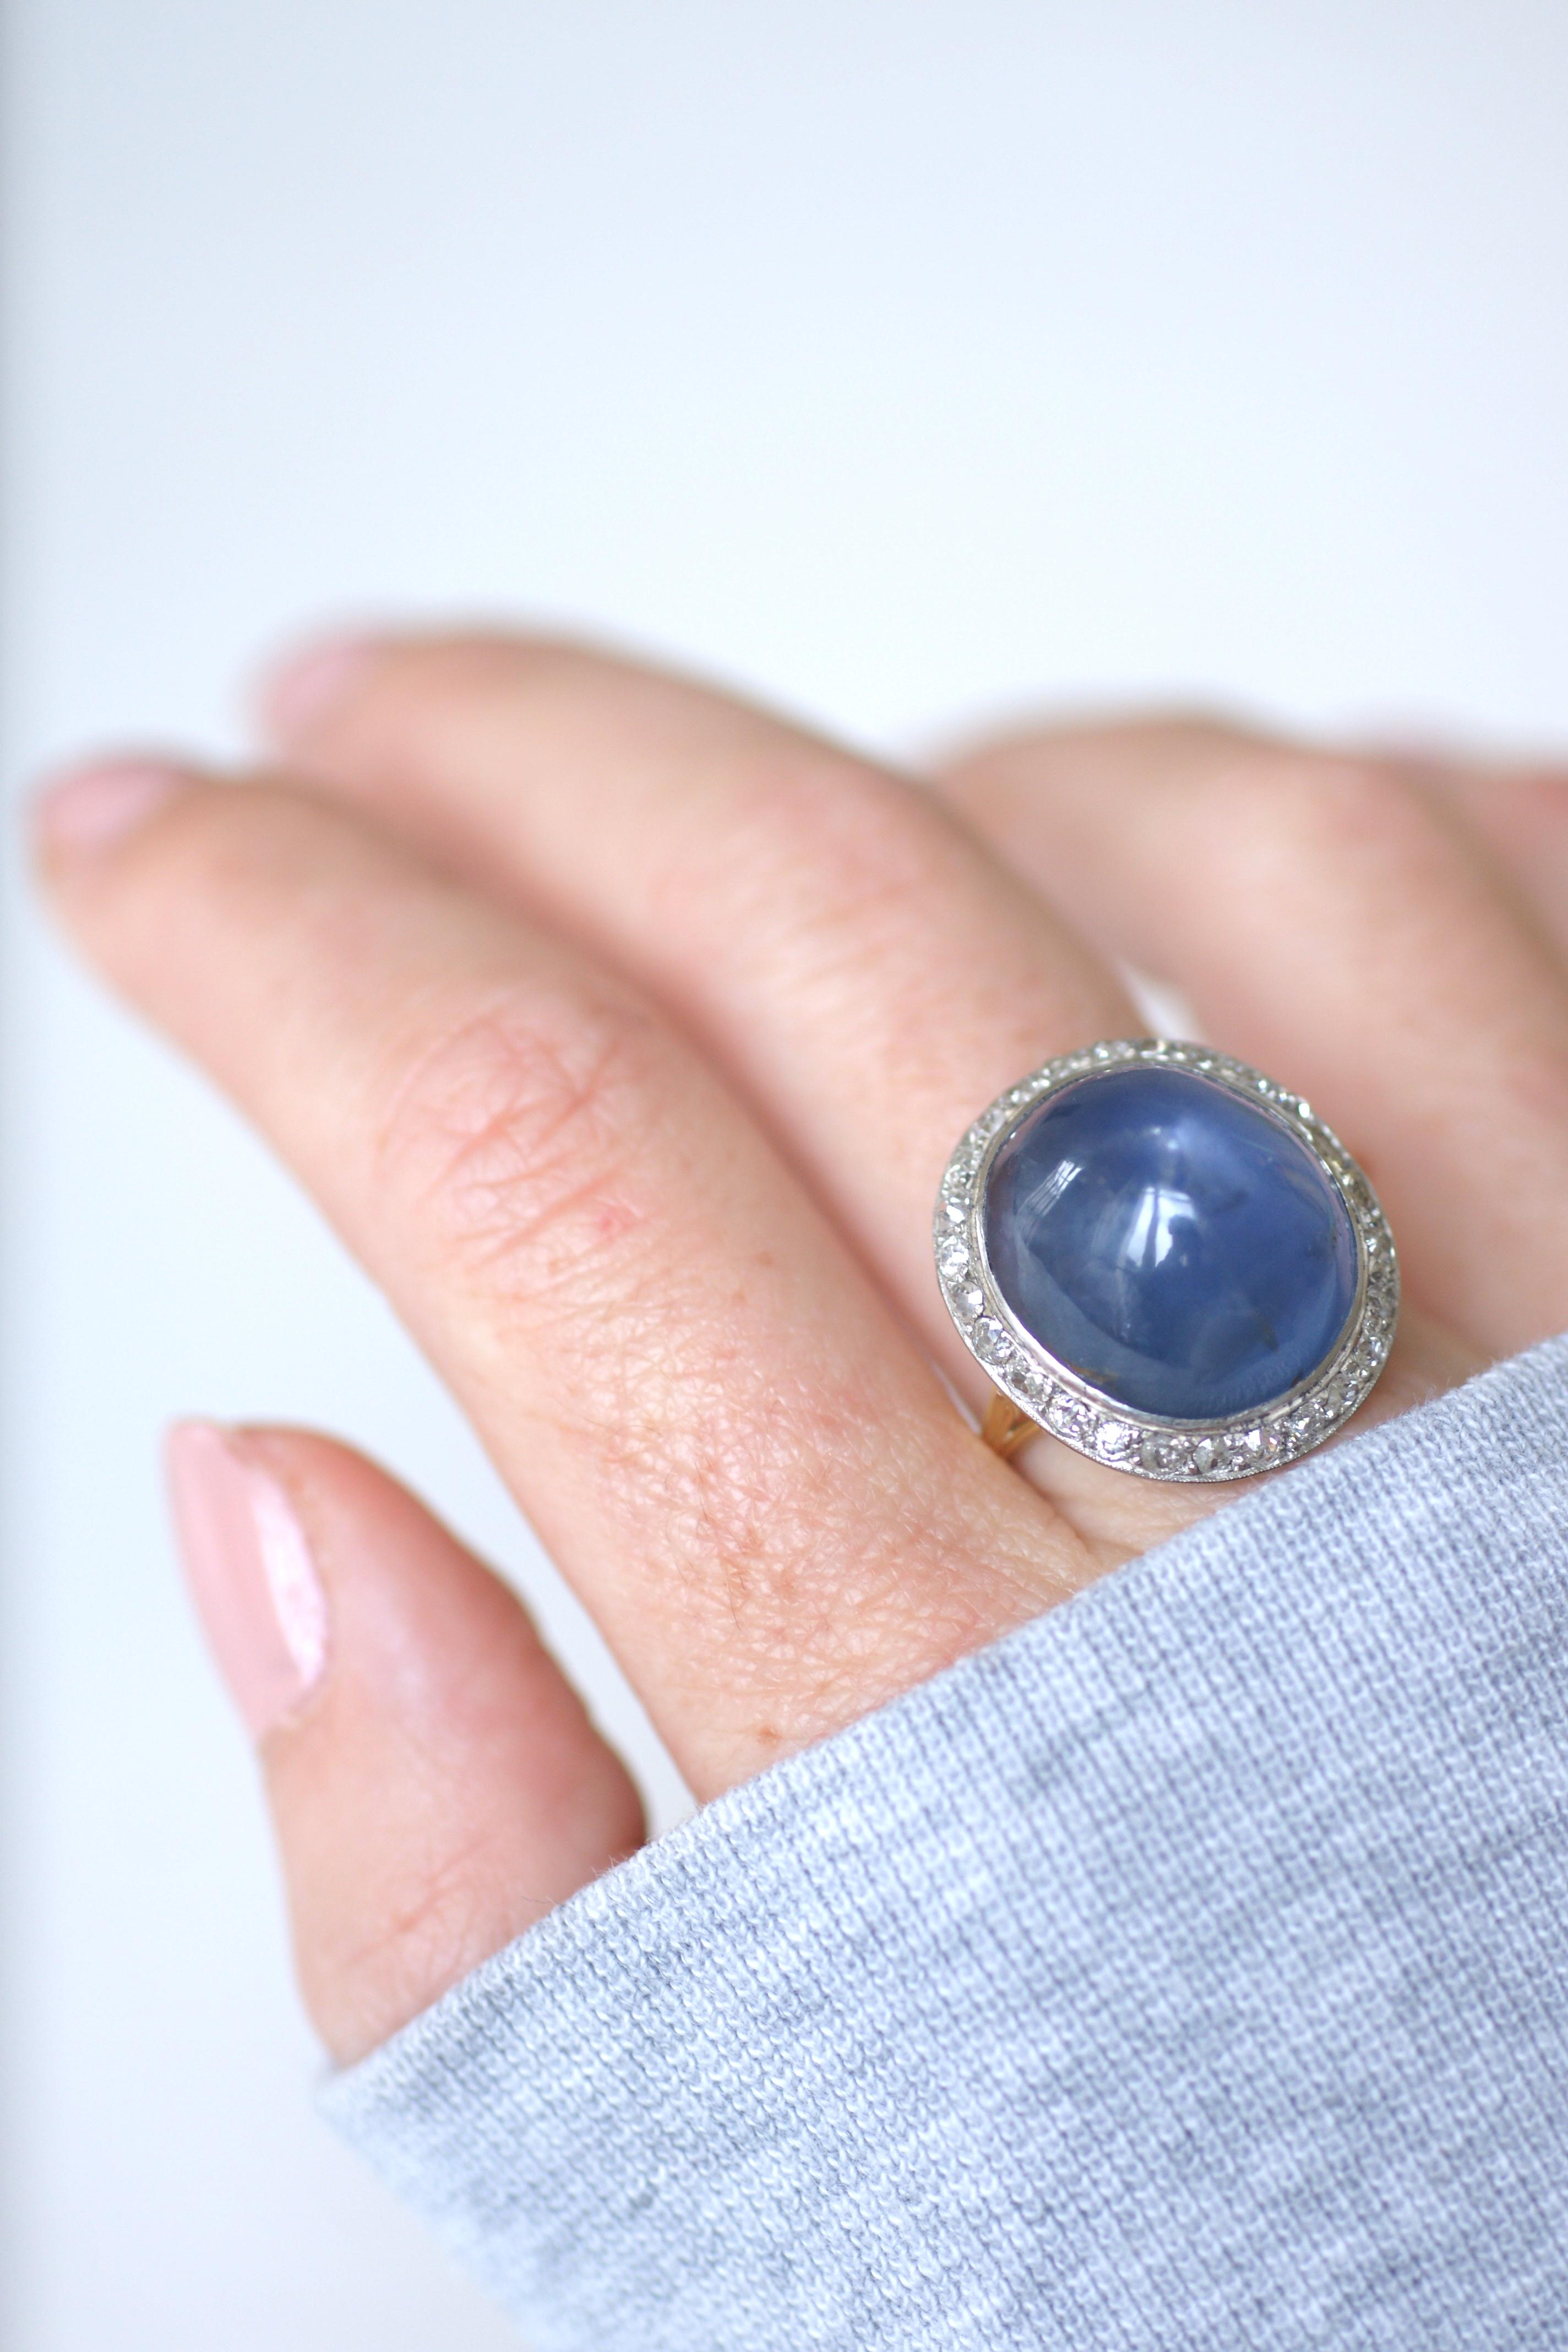 Edwardian Gold and Platinum Cluster Ring with 35cts Ceylan Star Sapphire Caboch 3